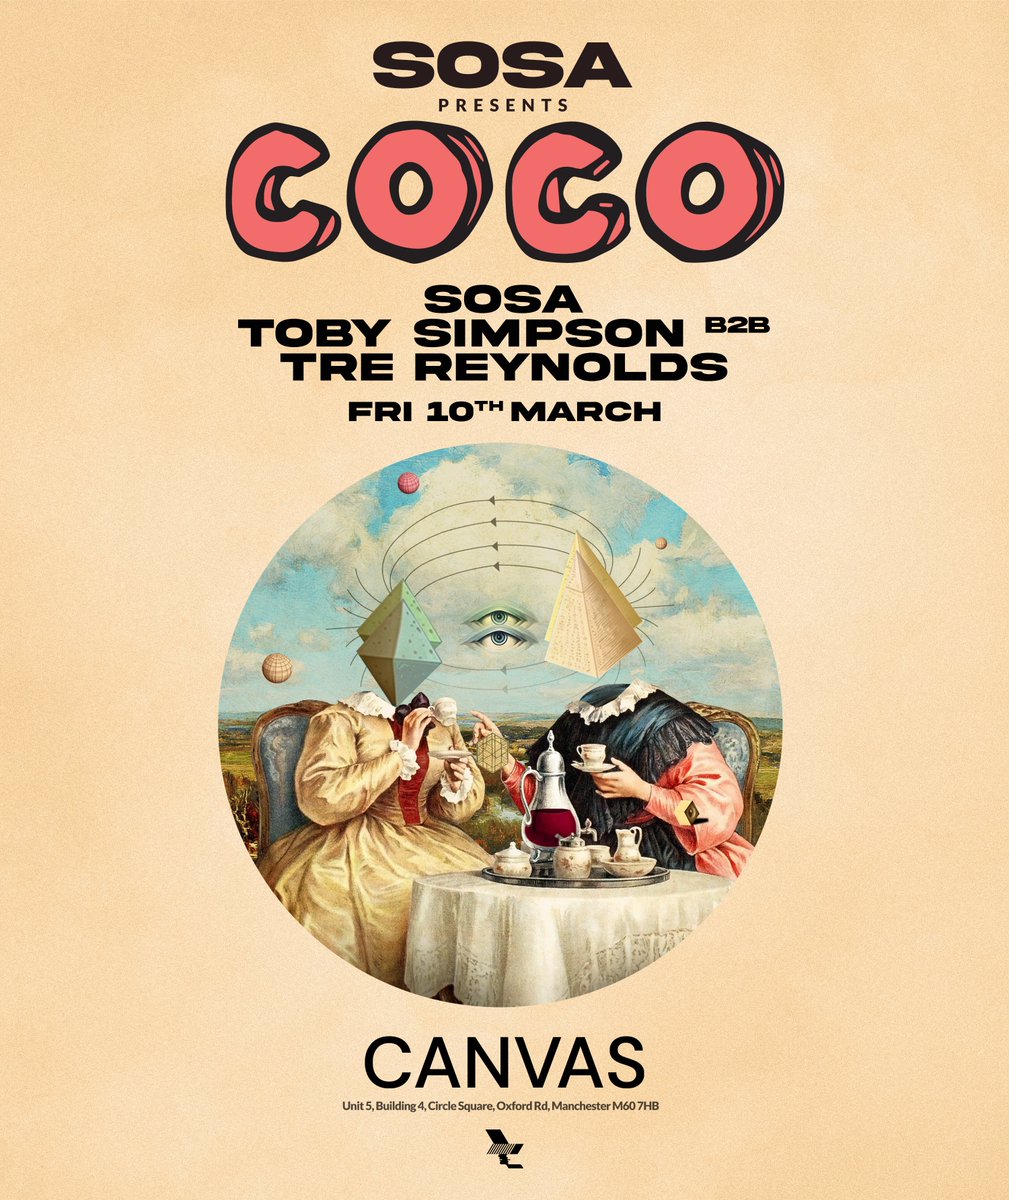 Excited to announce the line up for our COCO event in Manny 👀 This is gonna be a MASSIVE show 🔥 @sosamusicuk @tobysimpsonmusic @trereynolds_dj ❤️